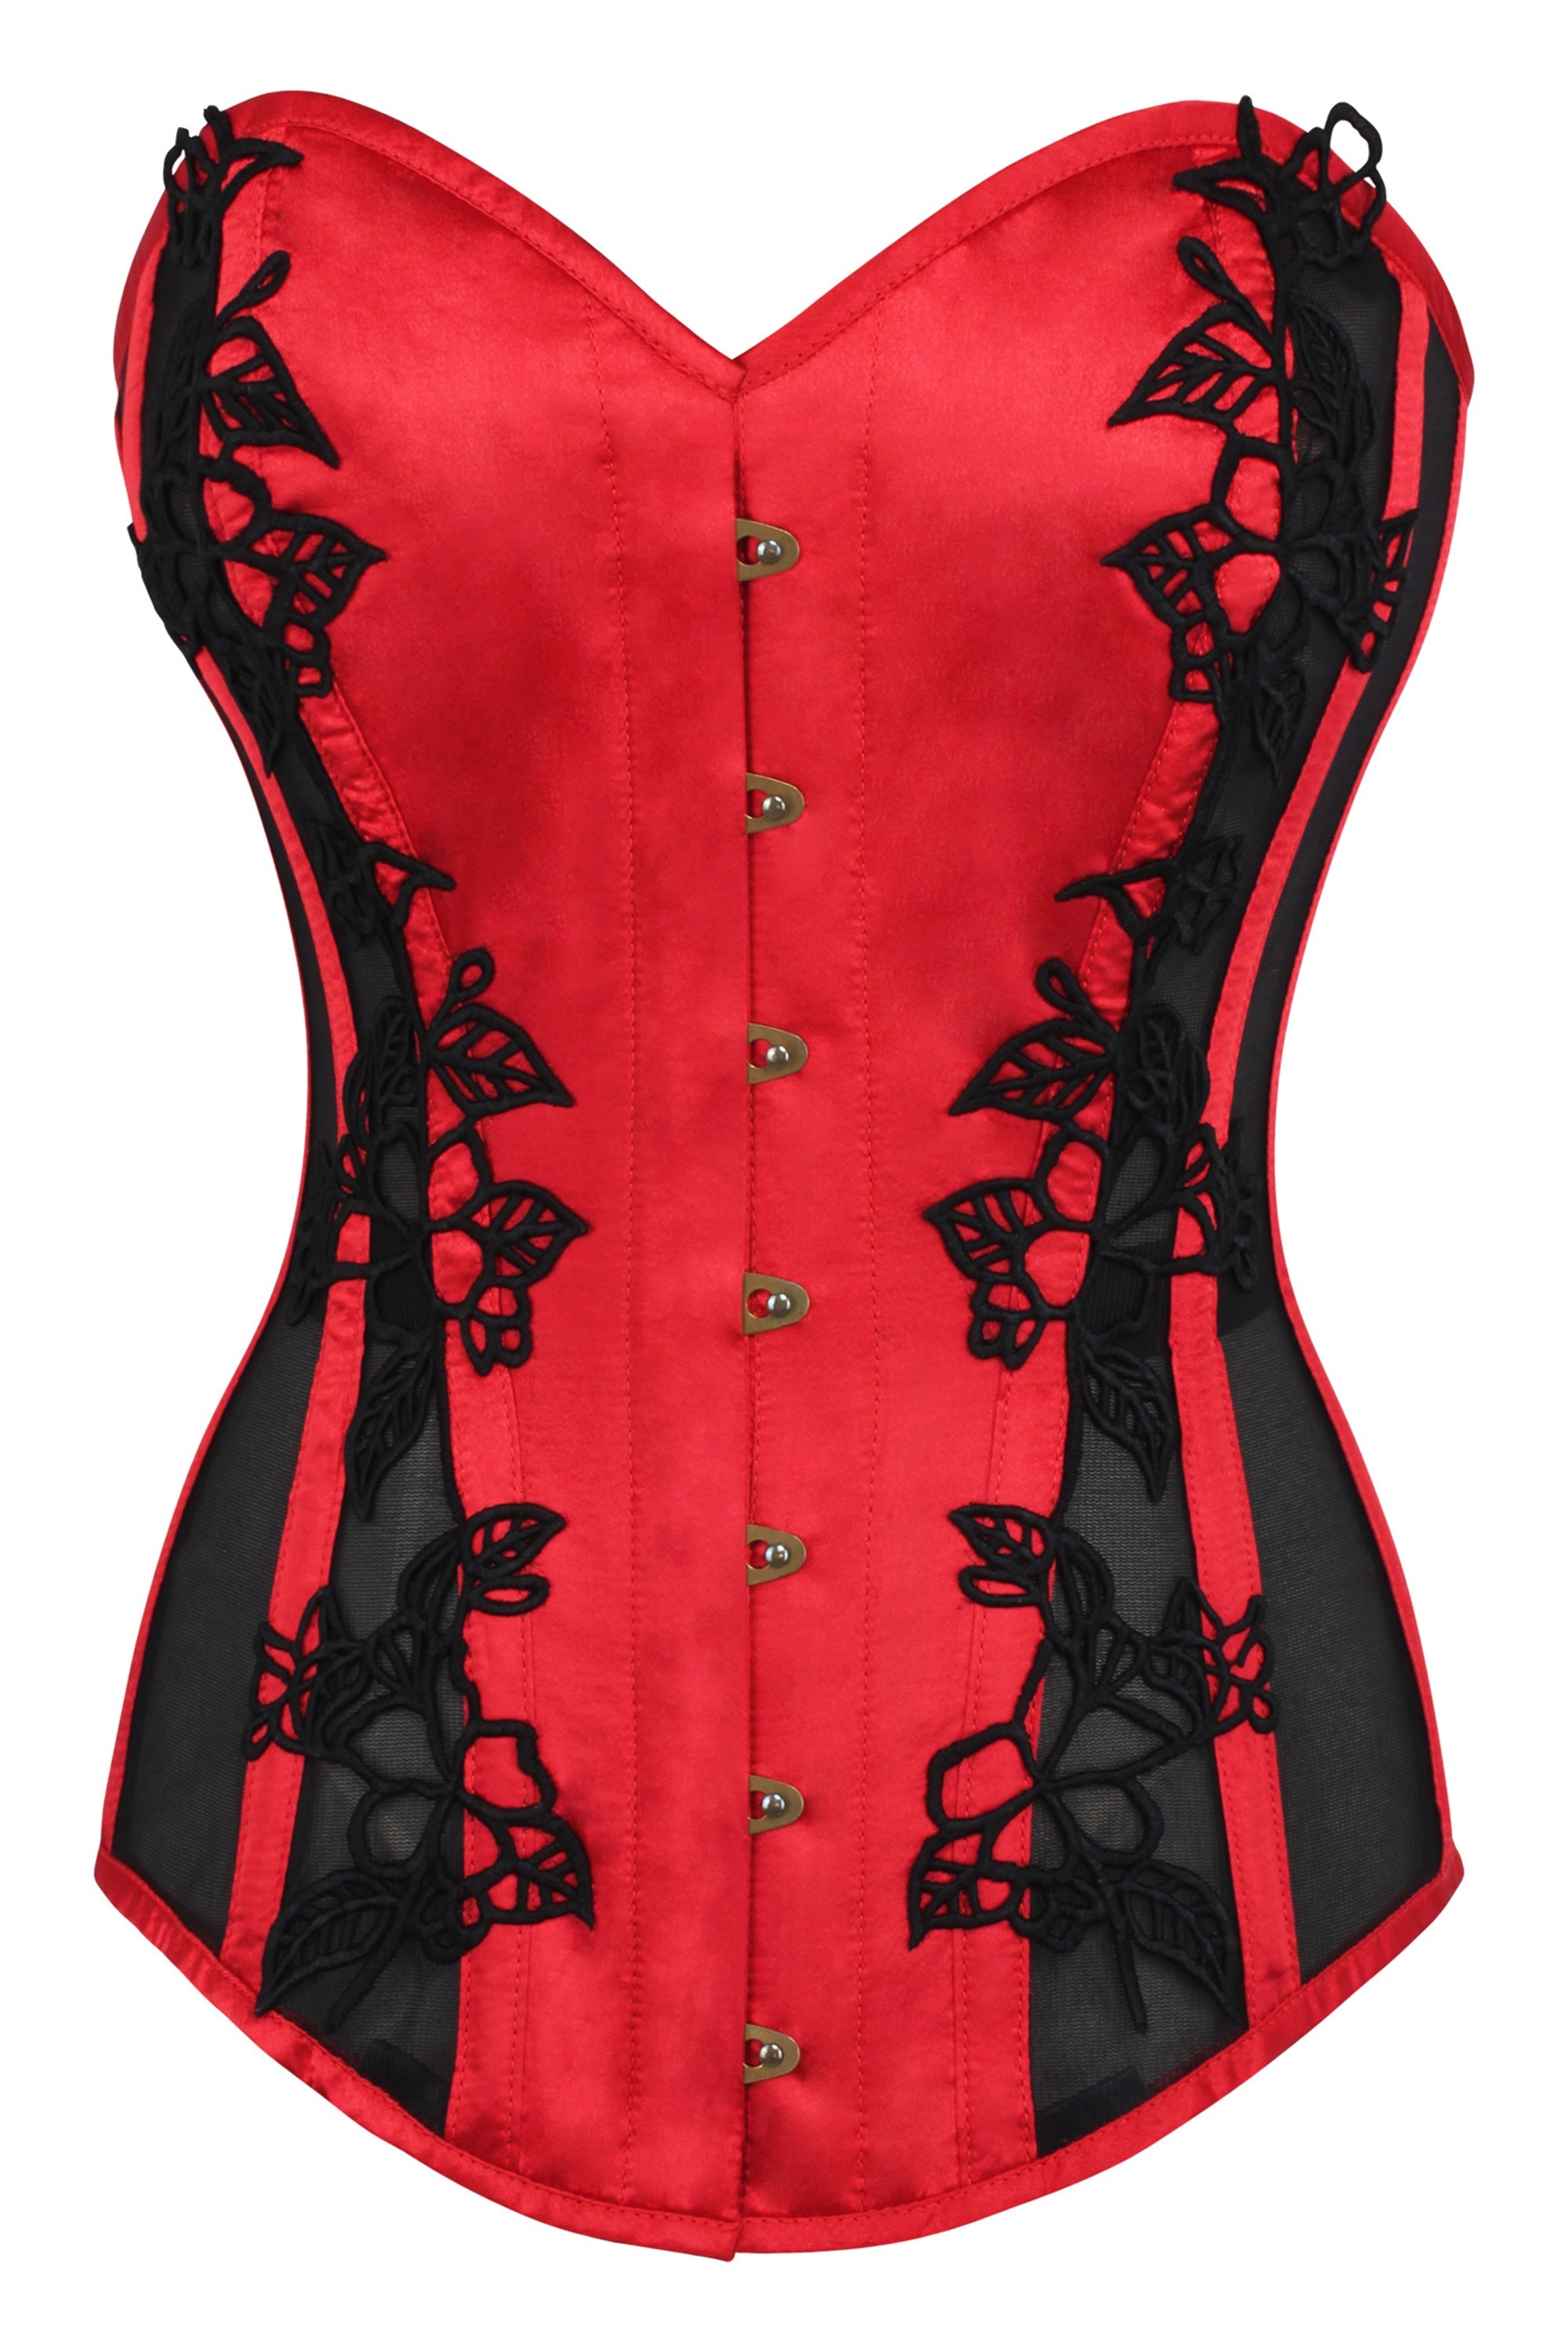 Lipstick Red Longline Overbust Corset with Black Lace and Mesh Panels